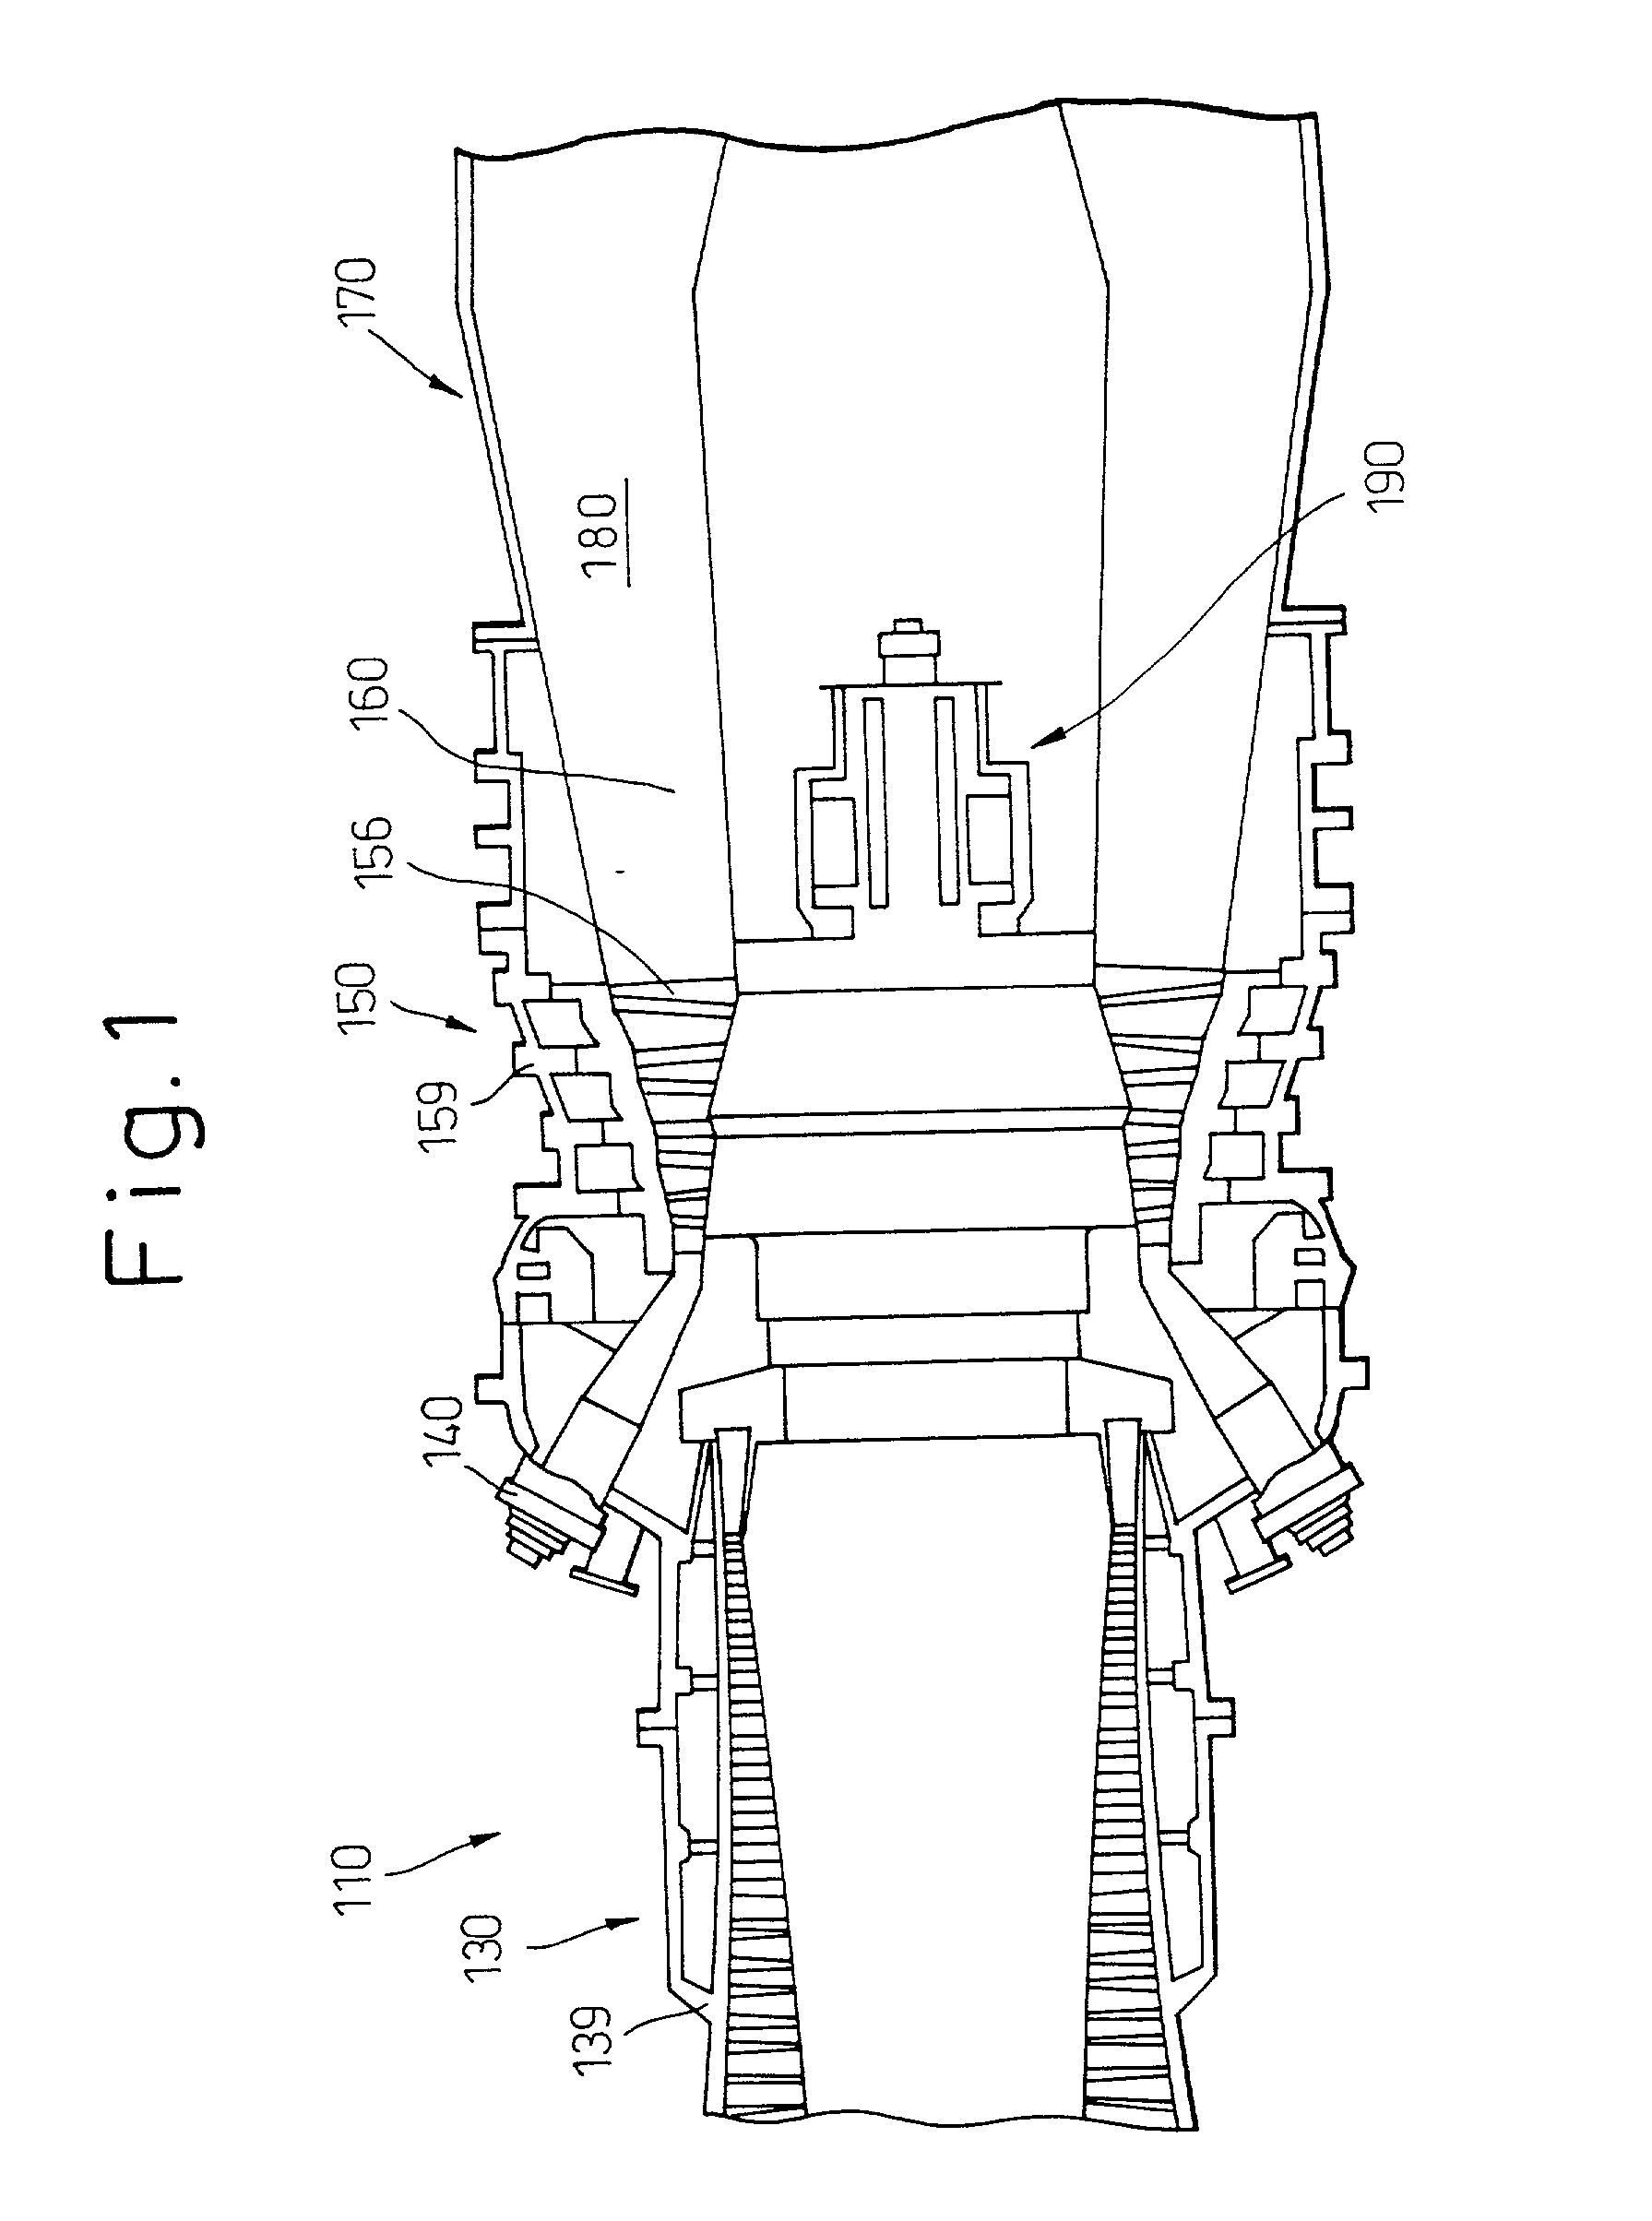 Axial-flow turbine having stepped portion formed in axial-flow turbine passage